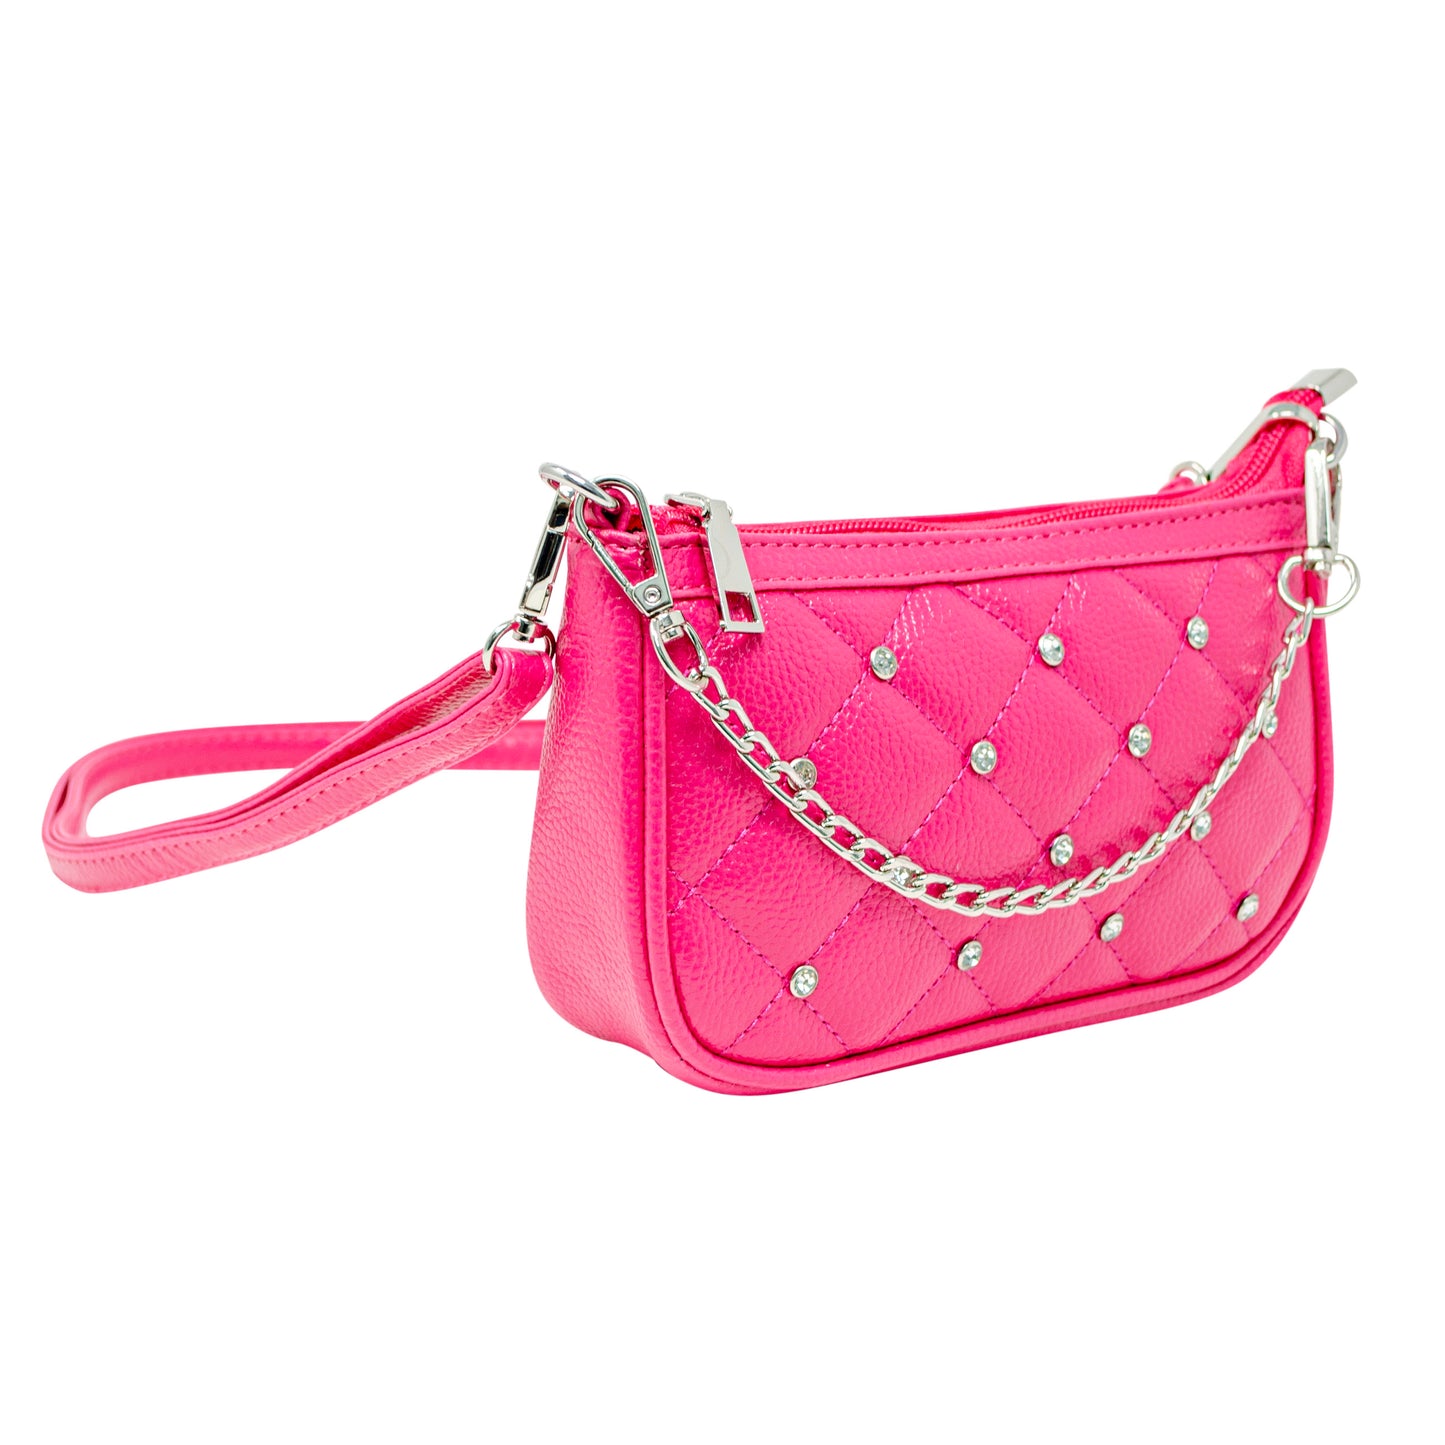 Girl's Quilted Leather Stud Clutch